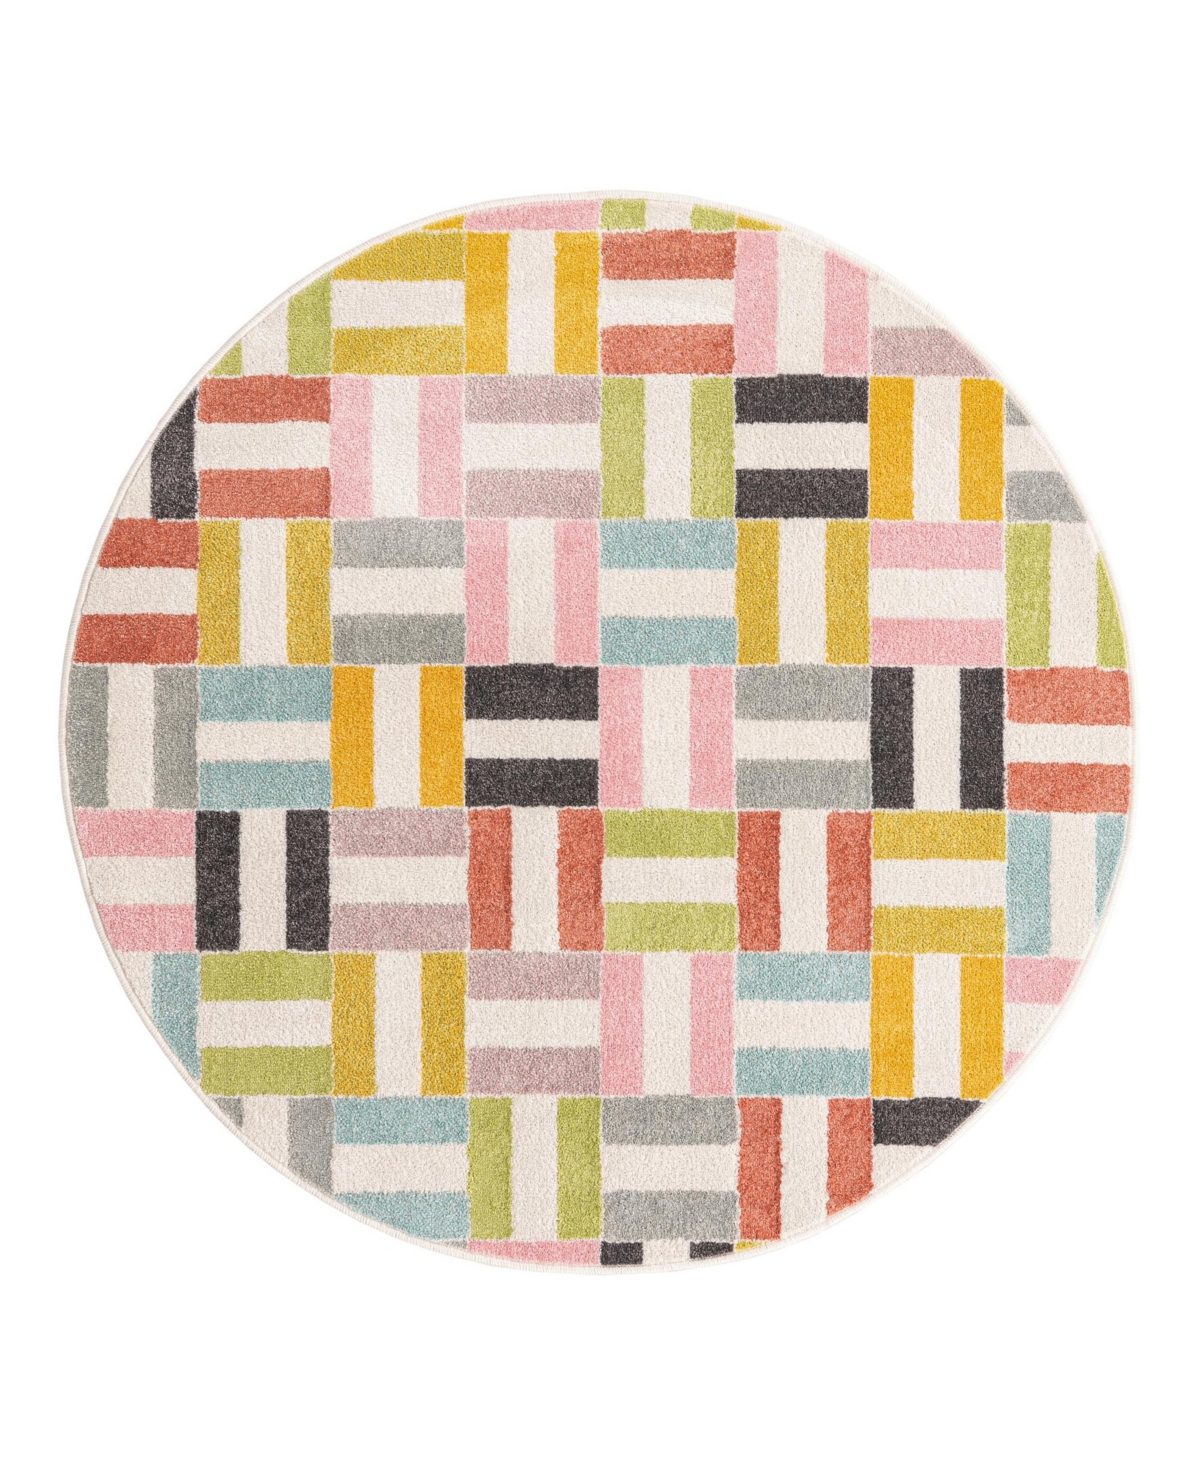 Bayshore Home Campy Kids Chicklets 5'3" X 5'3" Round Area Rug In Multi